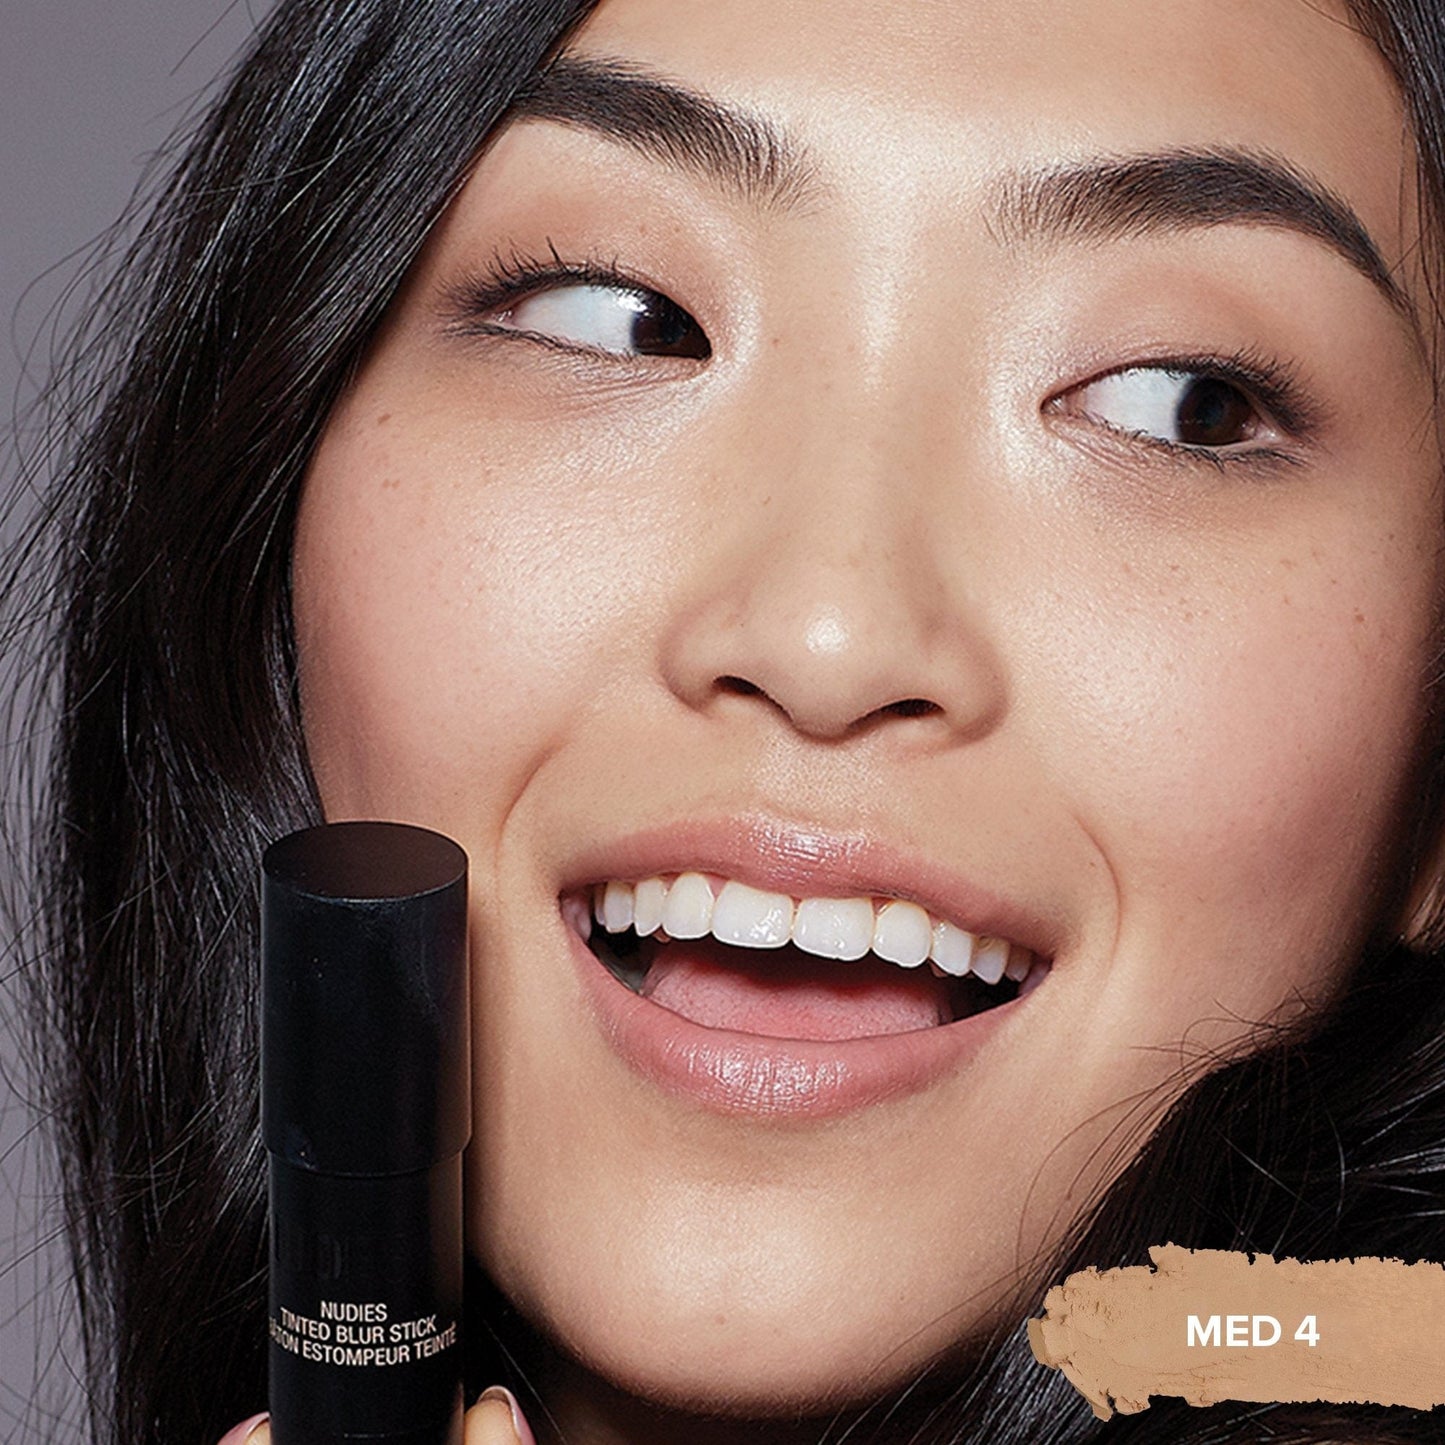 Asian young woman wearing a Tinted Blur Foundation Stick in shade Medium 4